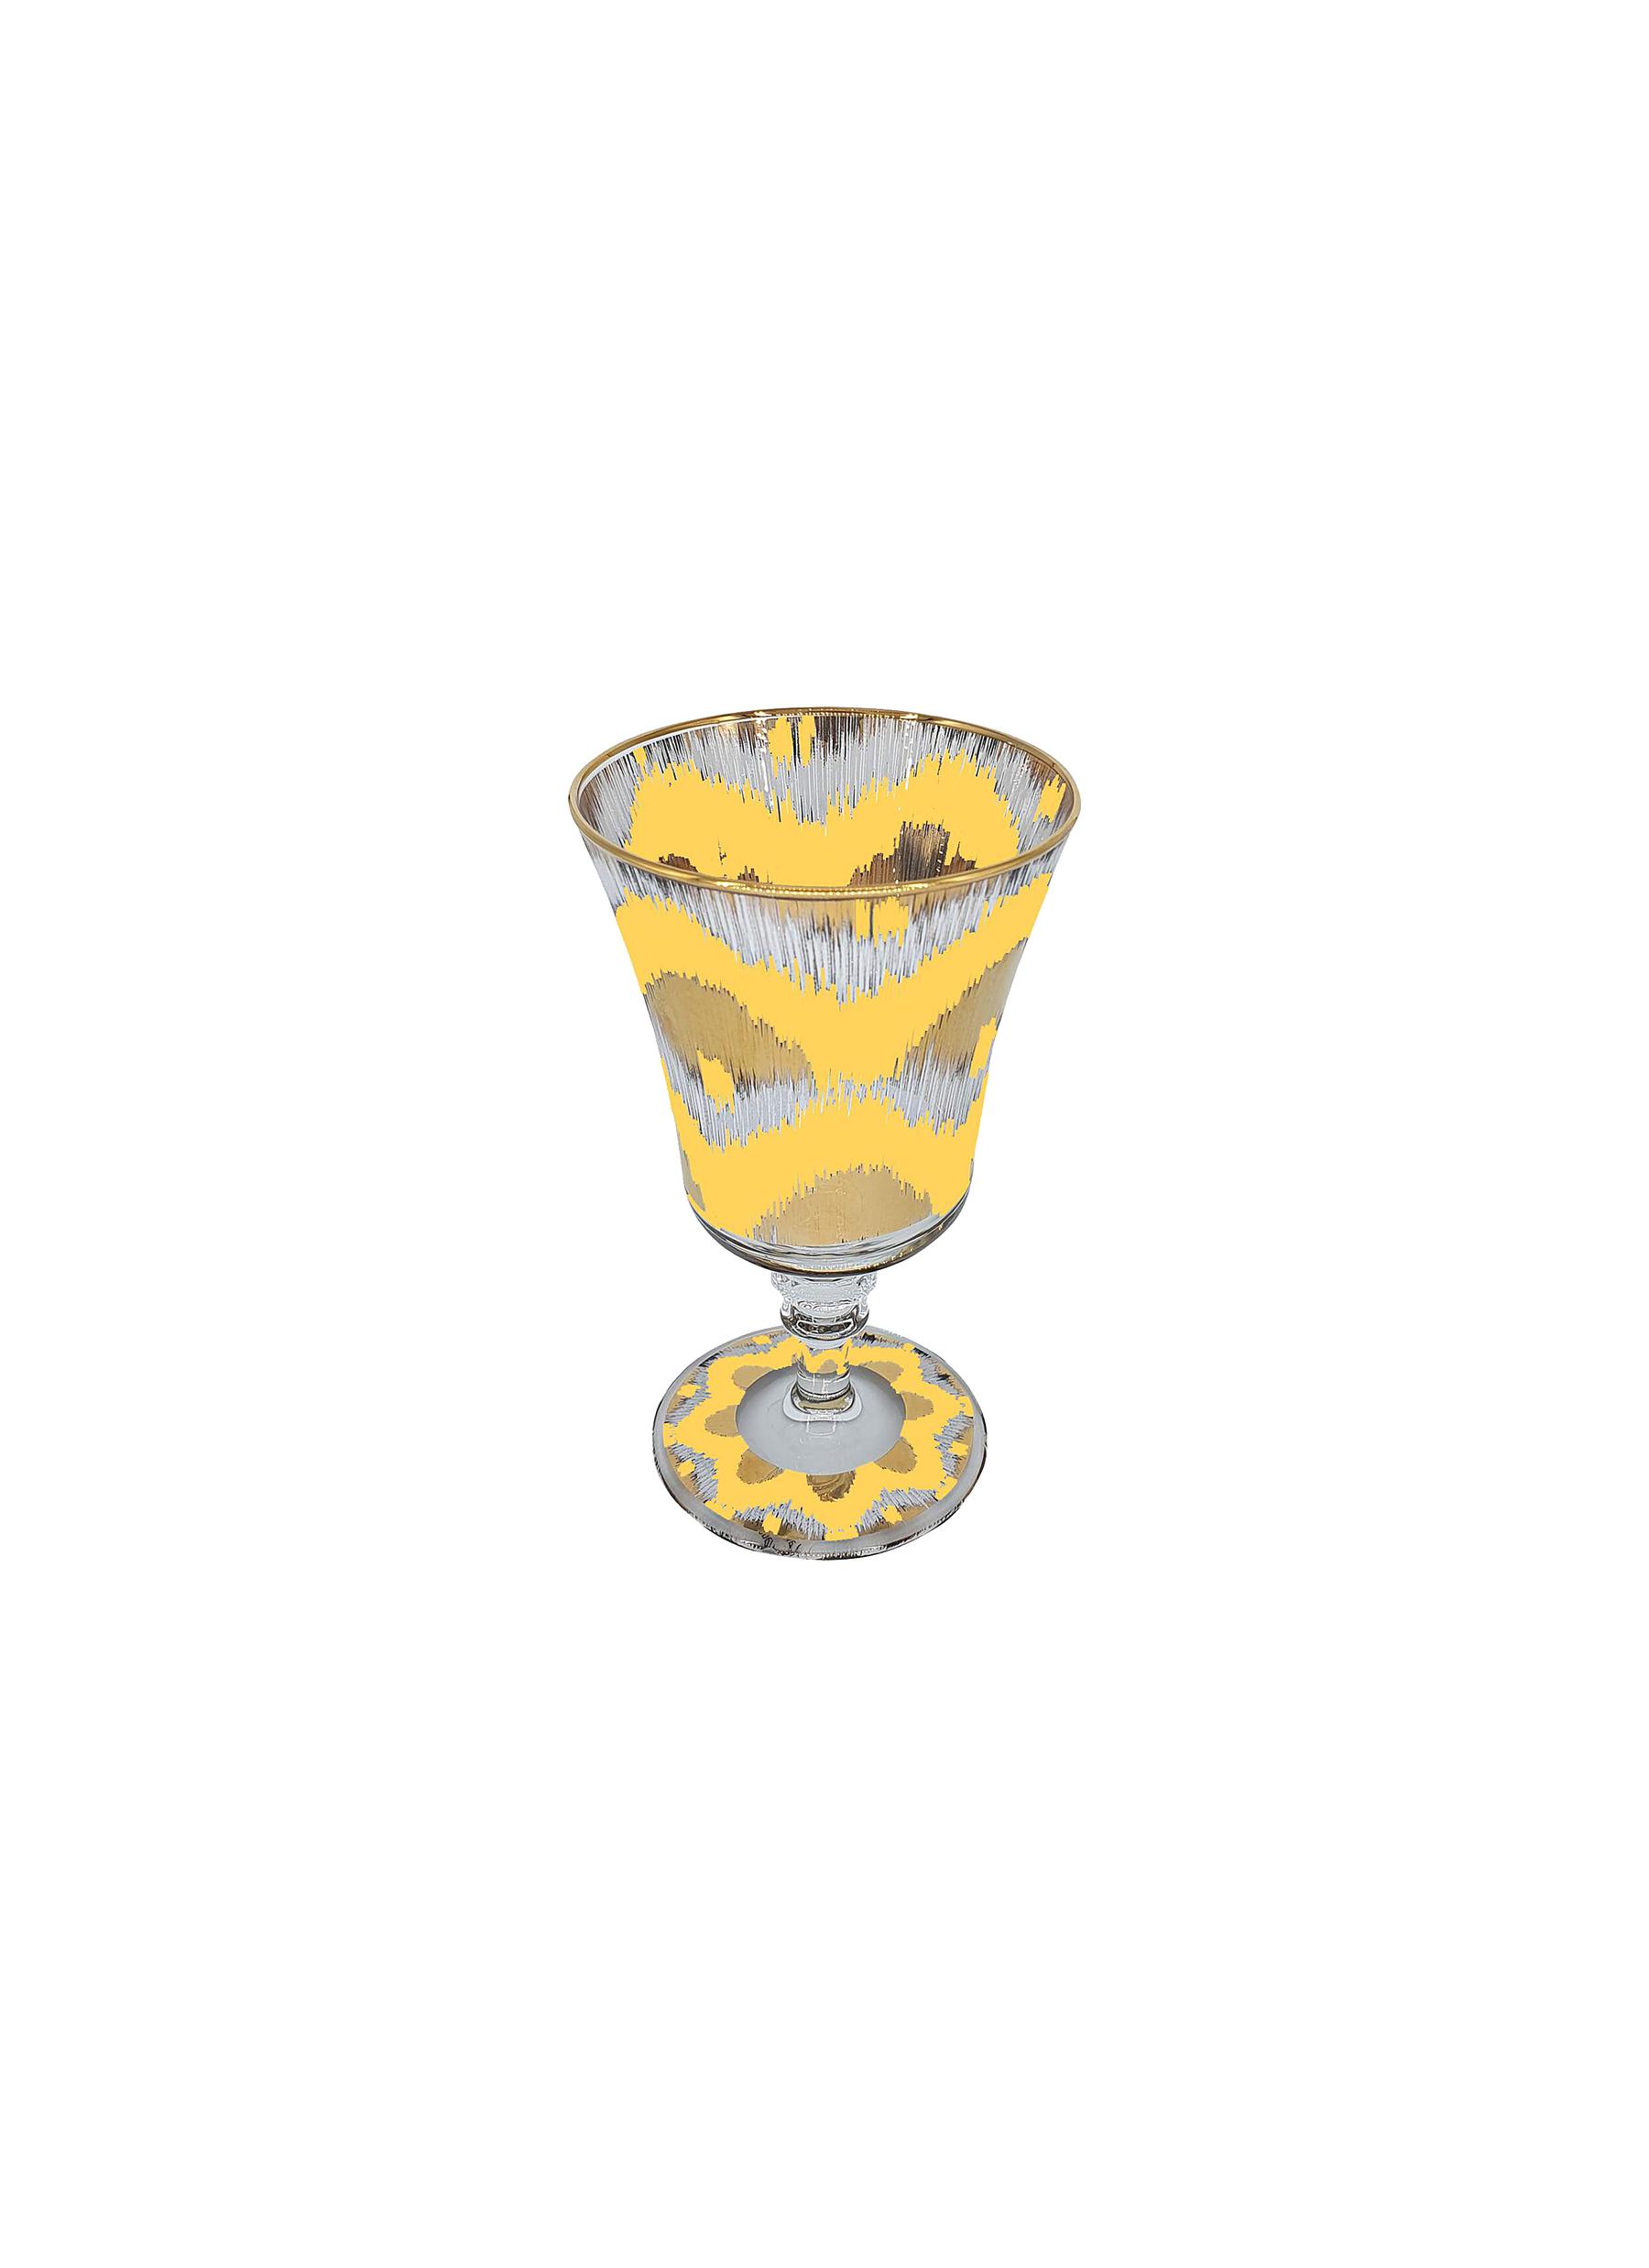 Les Ottomans Yellow Patterned Footed Glass In Gold Yellow